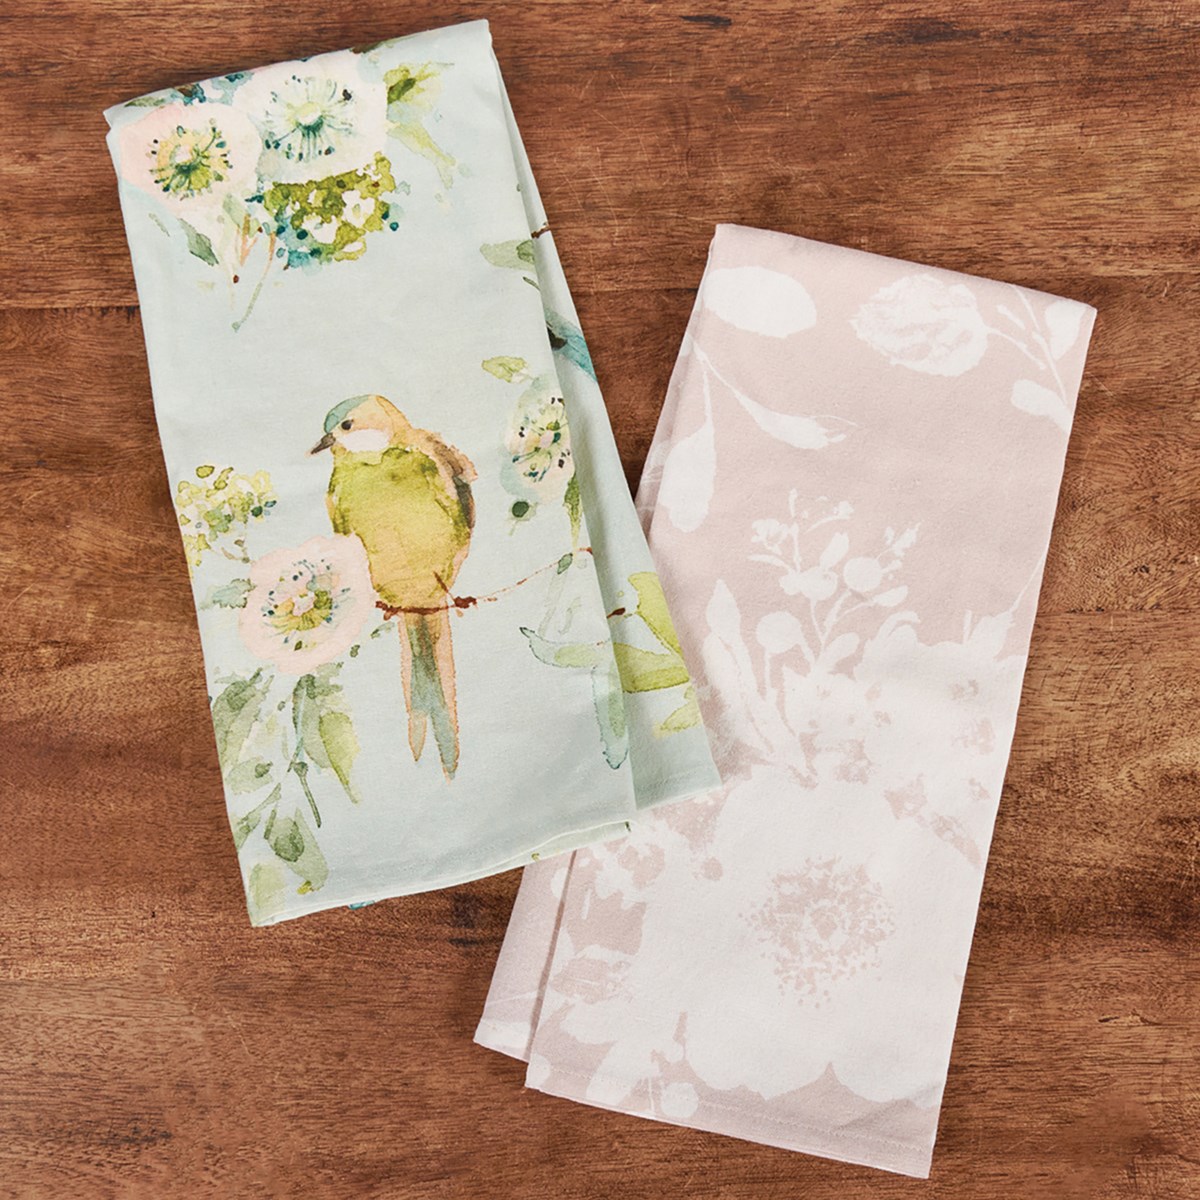 Bird And Floral Kitchen Towel - Cotton